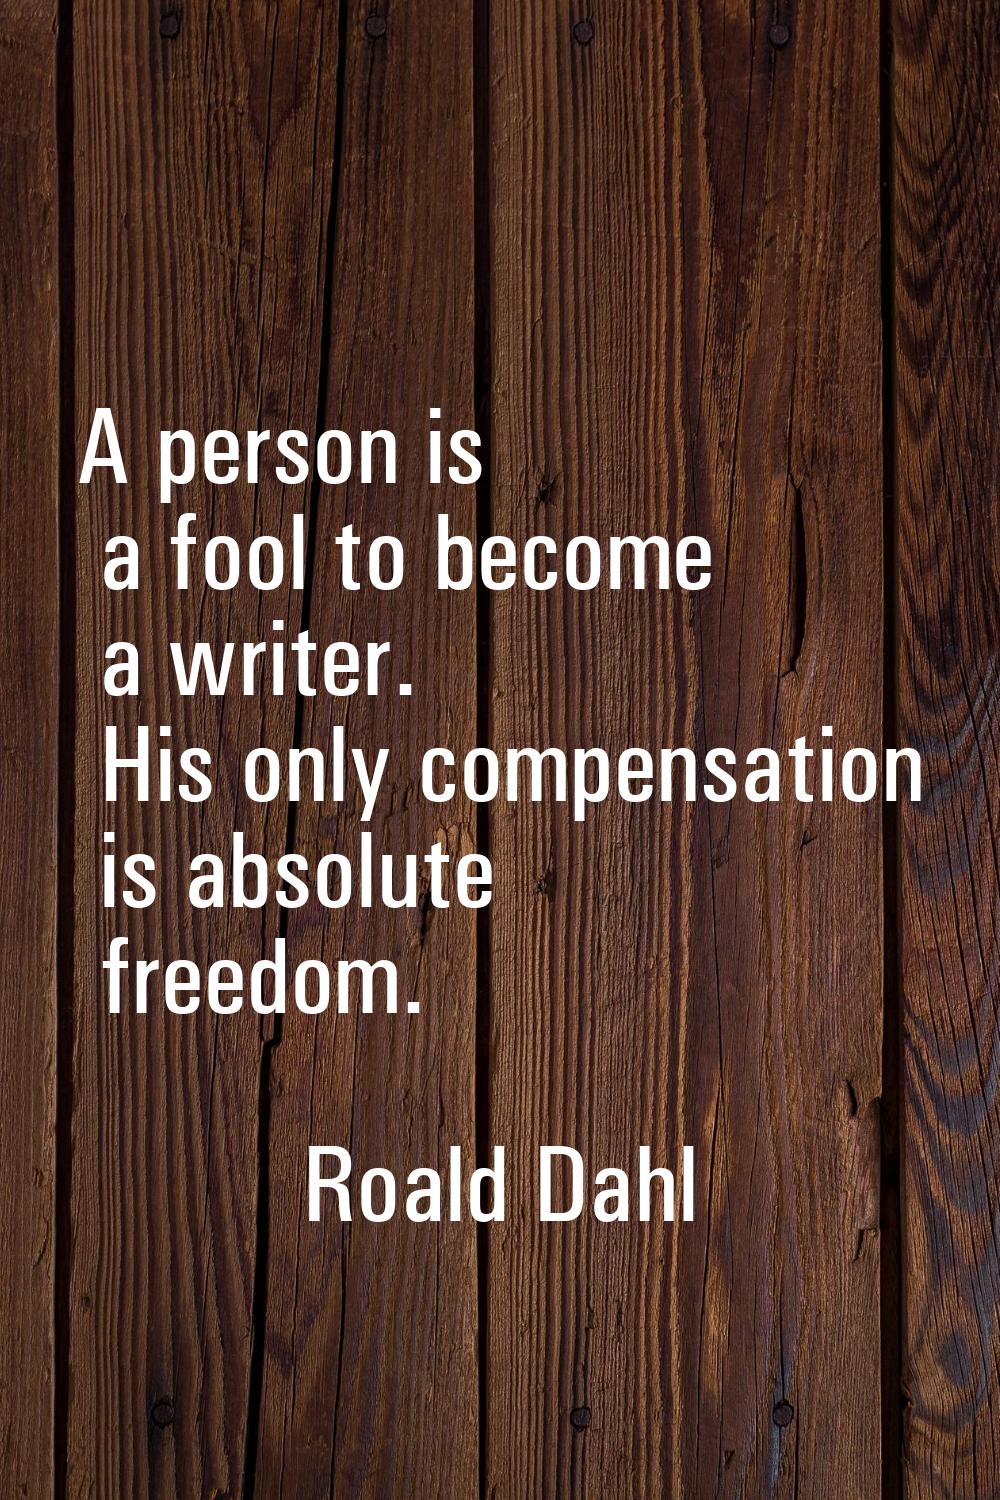 A person is a fool to become a writer. His only compensation is absolute freedom.